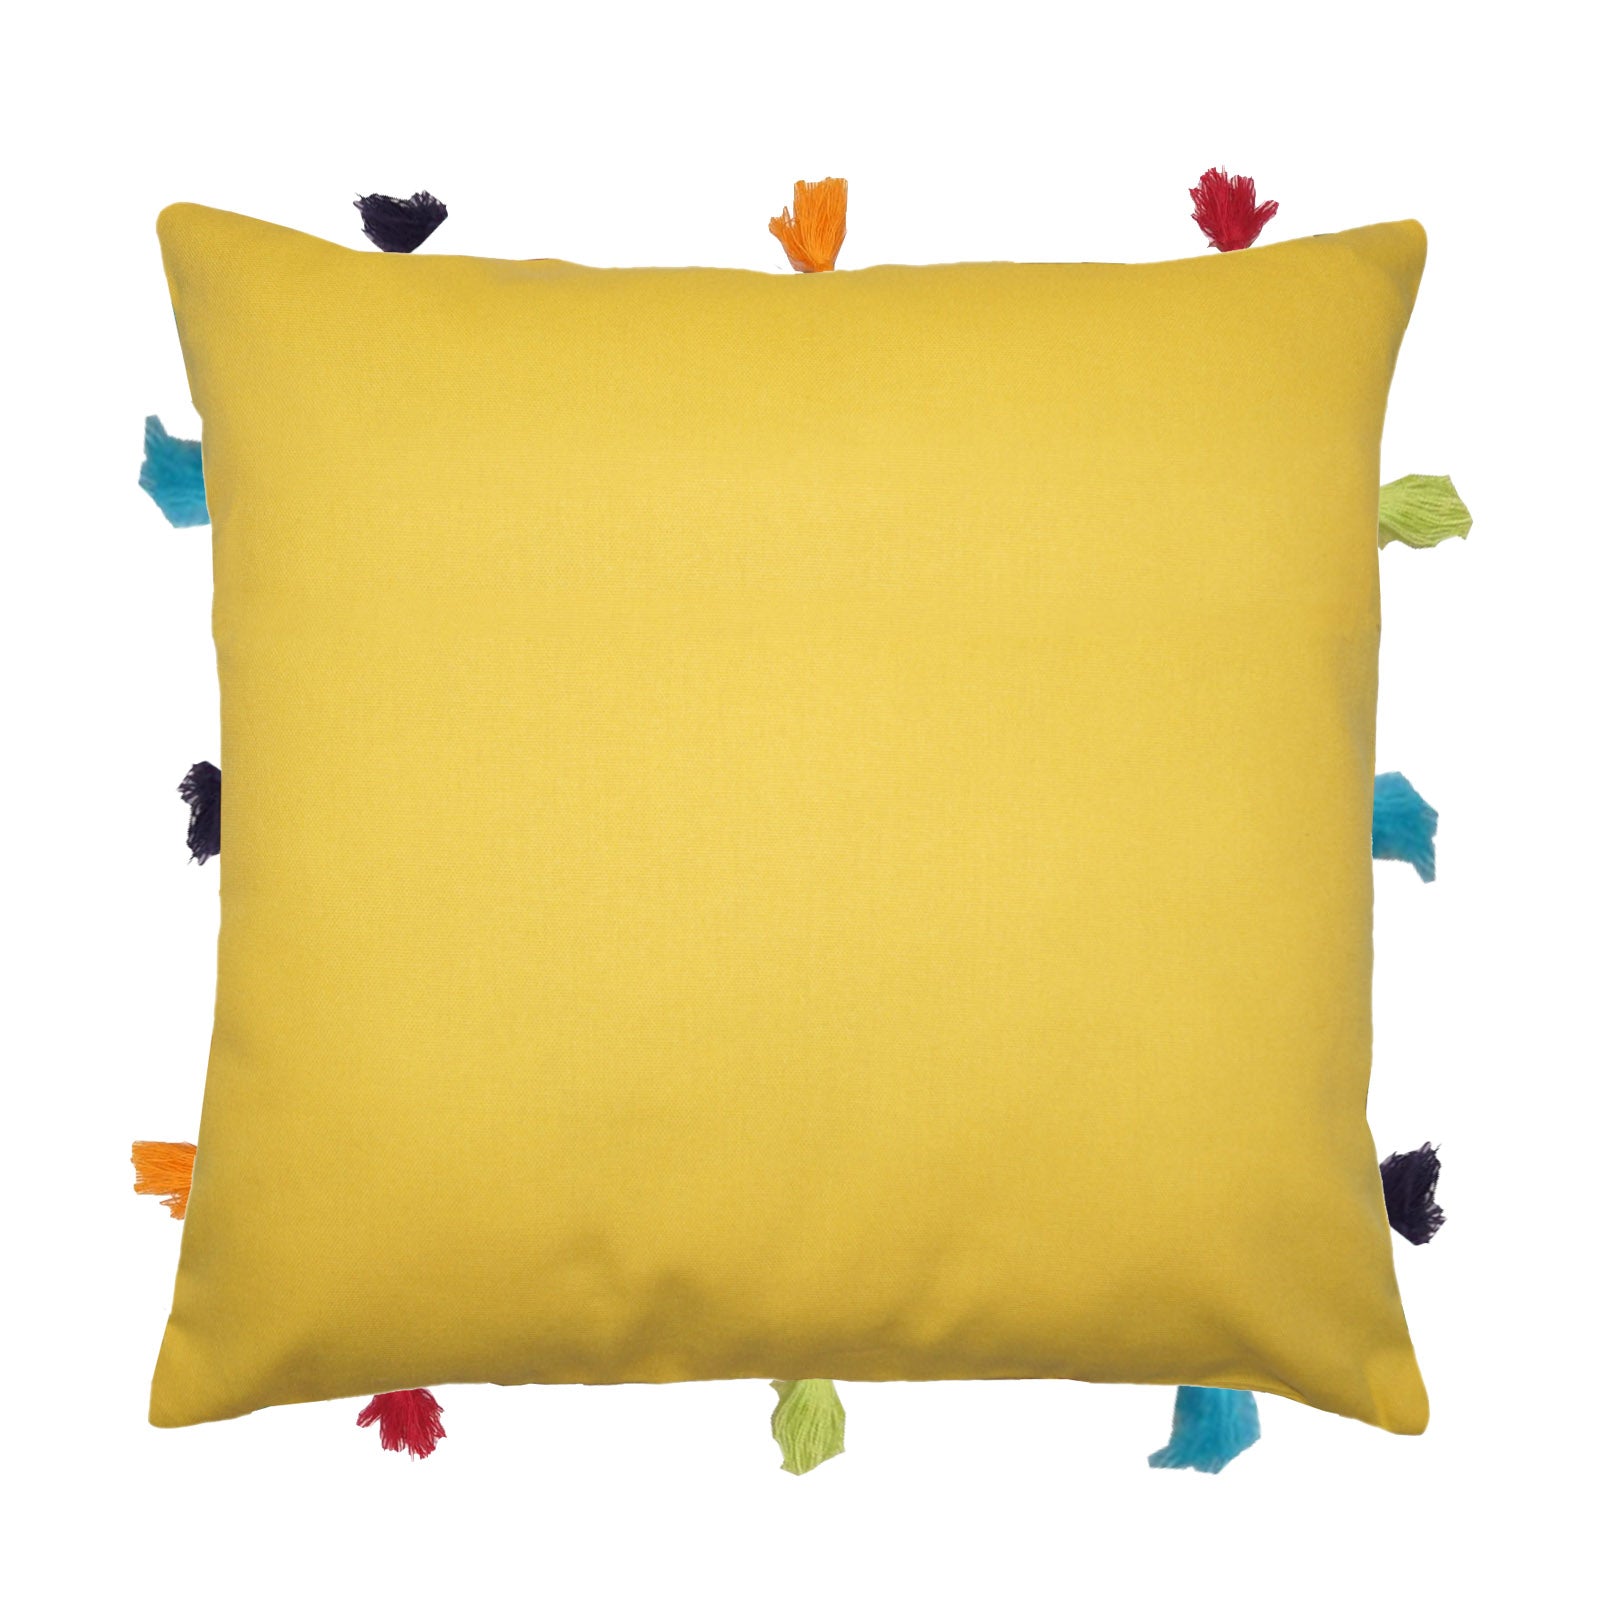 Lushomes cushion cover 12x12, boho cushion covers, sofa pillow cover, cushion covers with tassels, cushion cover with pom pom (12x12 Inches, Set of 1,Yellow )